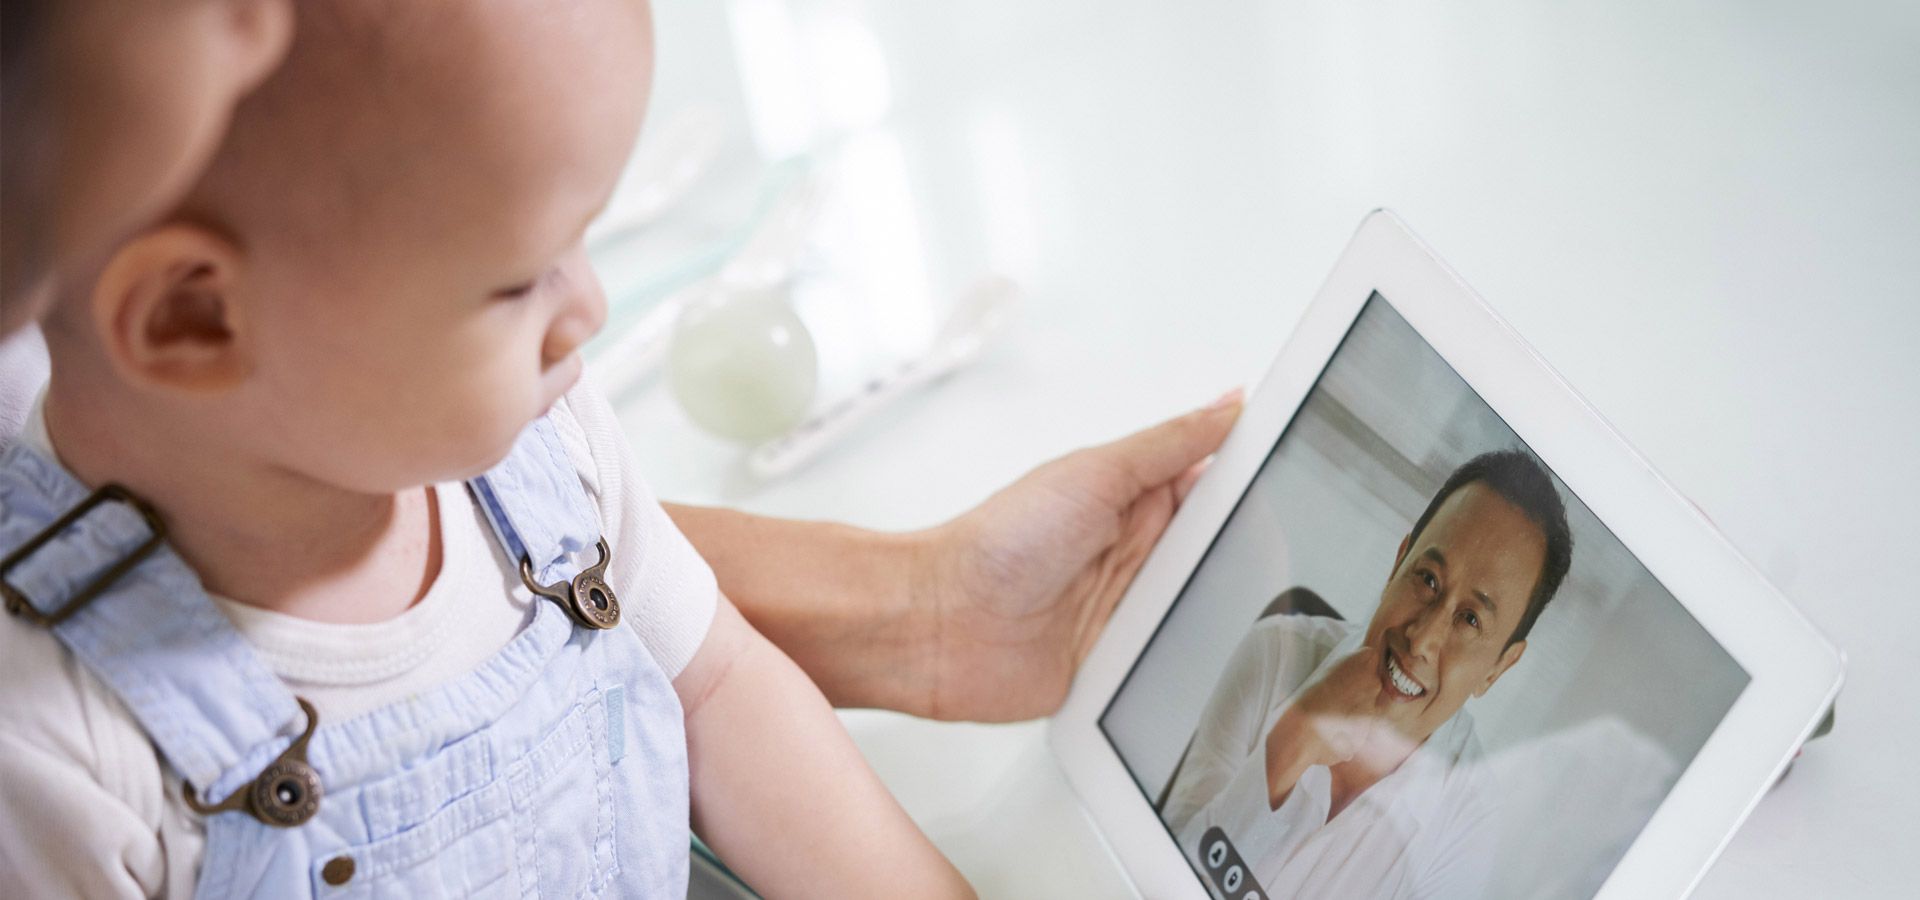 Child looks at a tablet with a person in a labcoat displayed